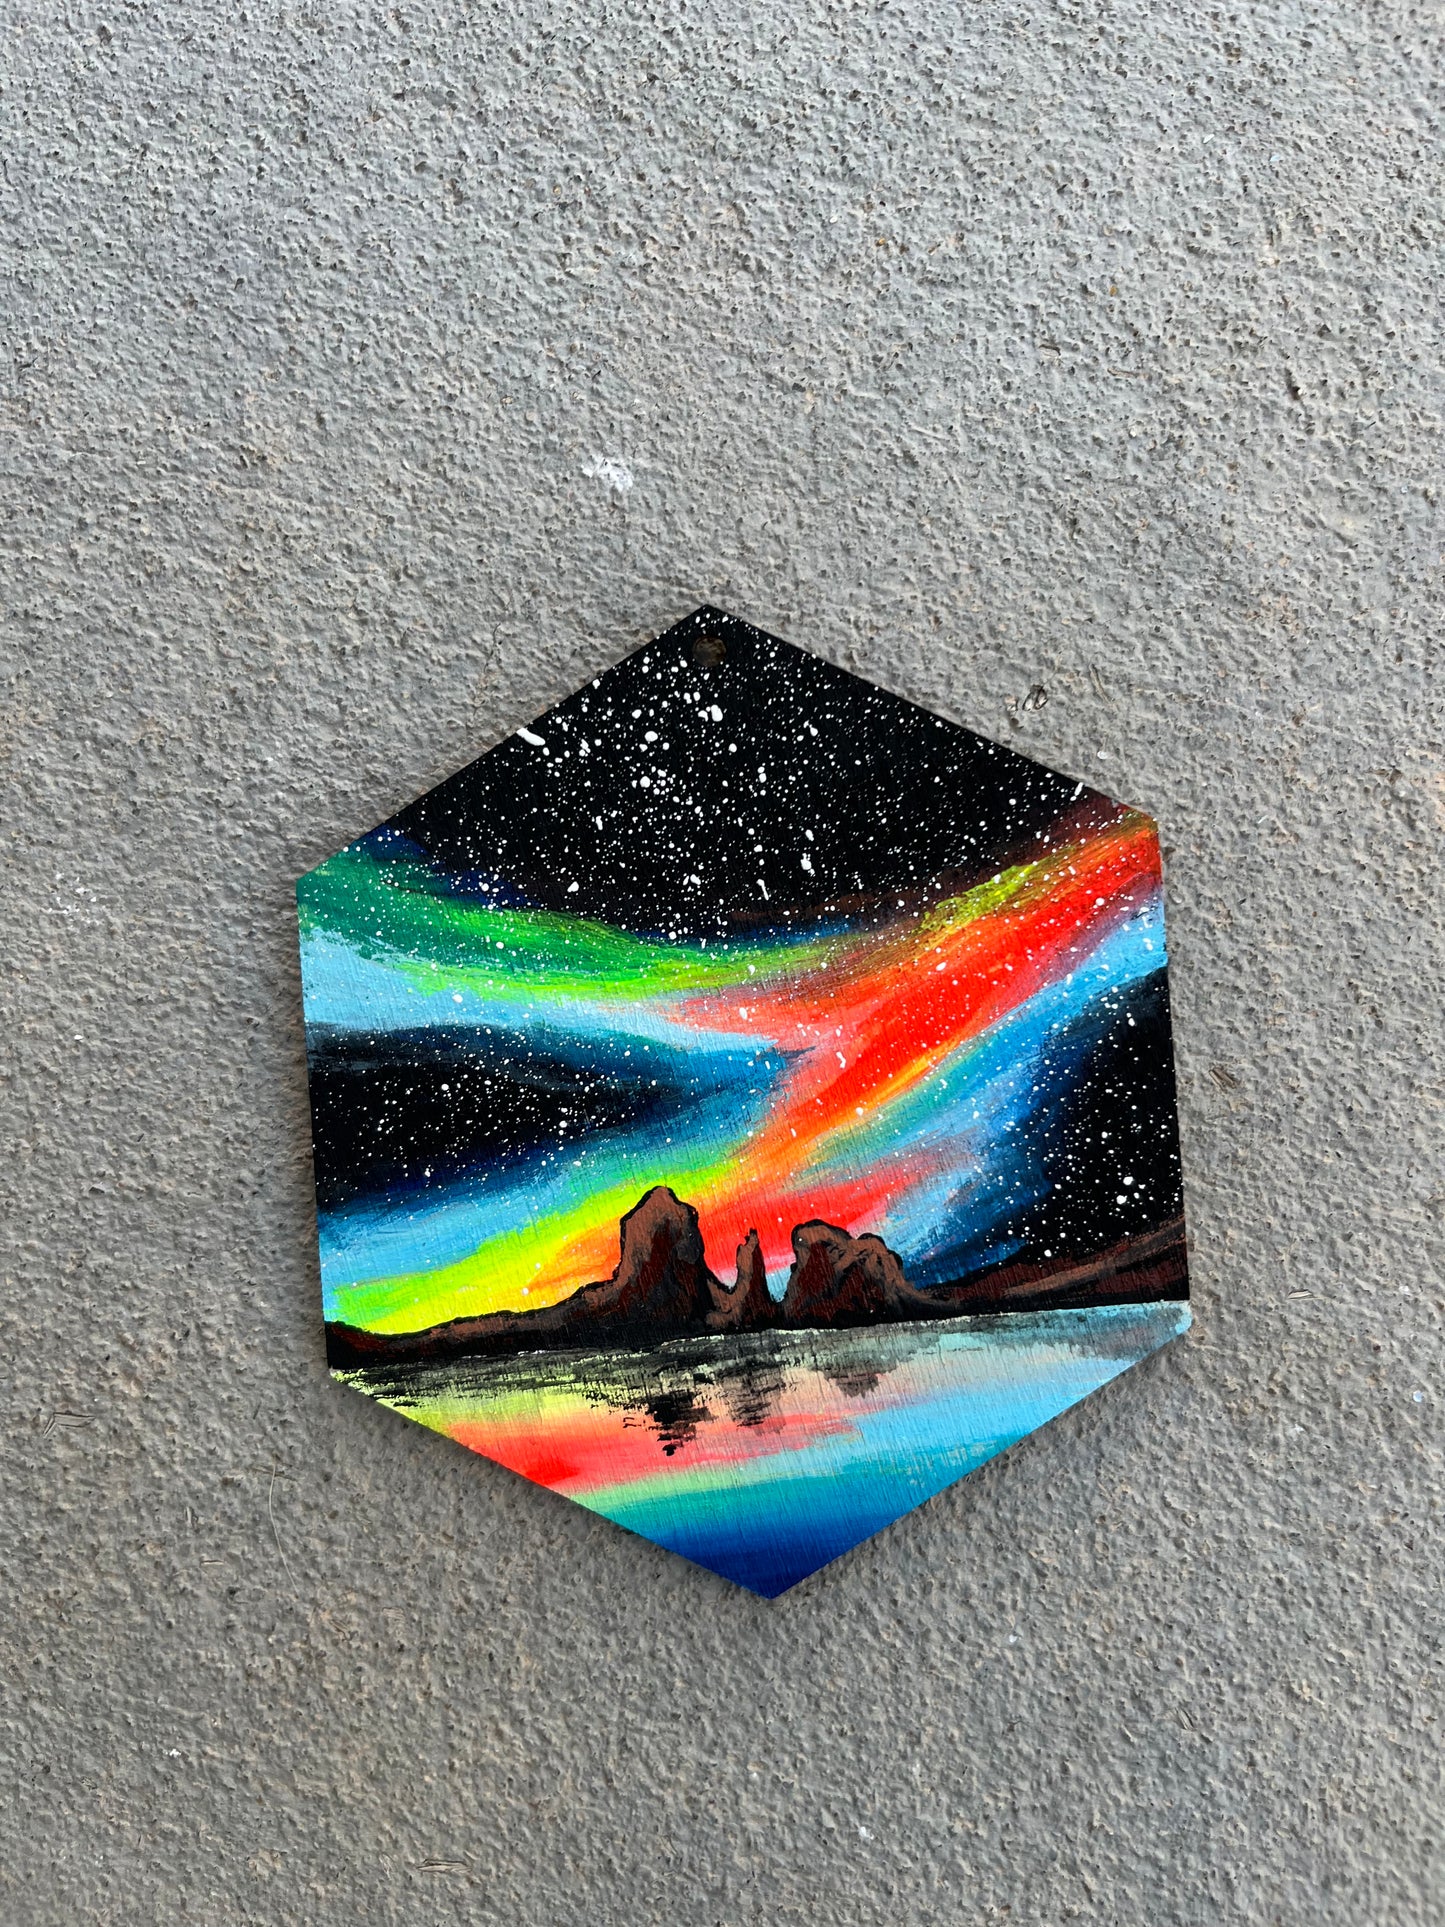 Desert galaxy cathedral rock handpainted ornament